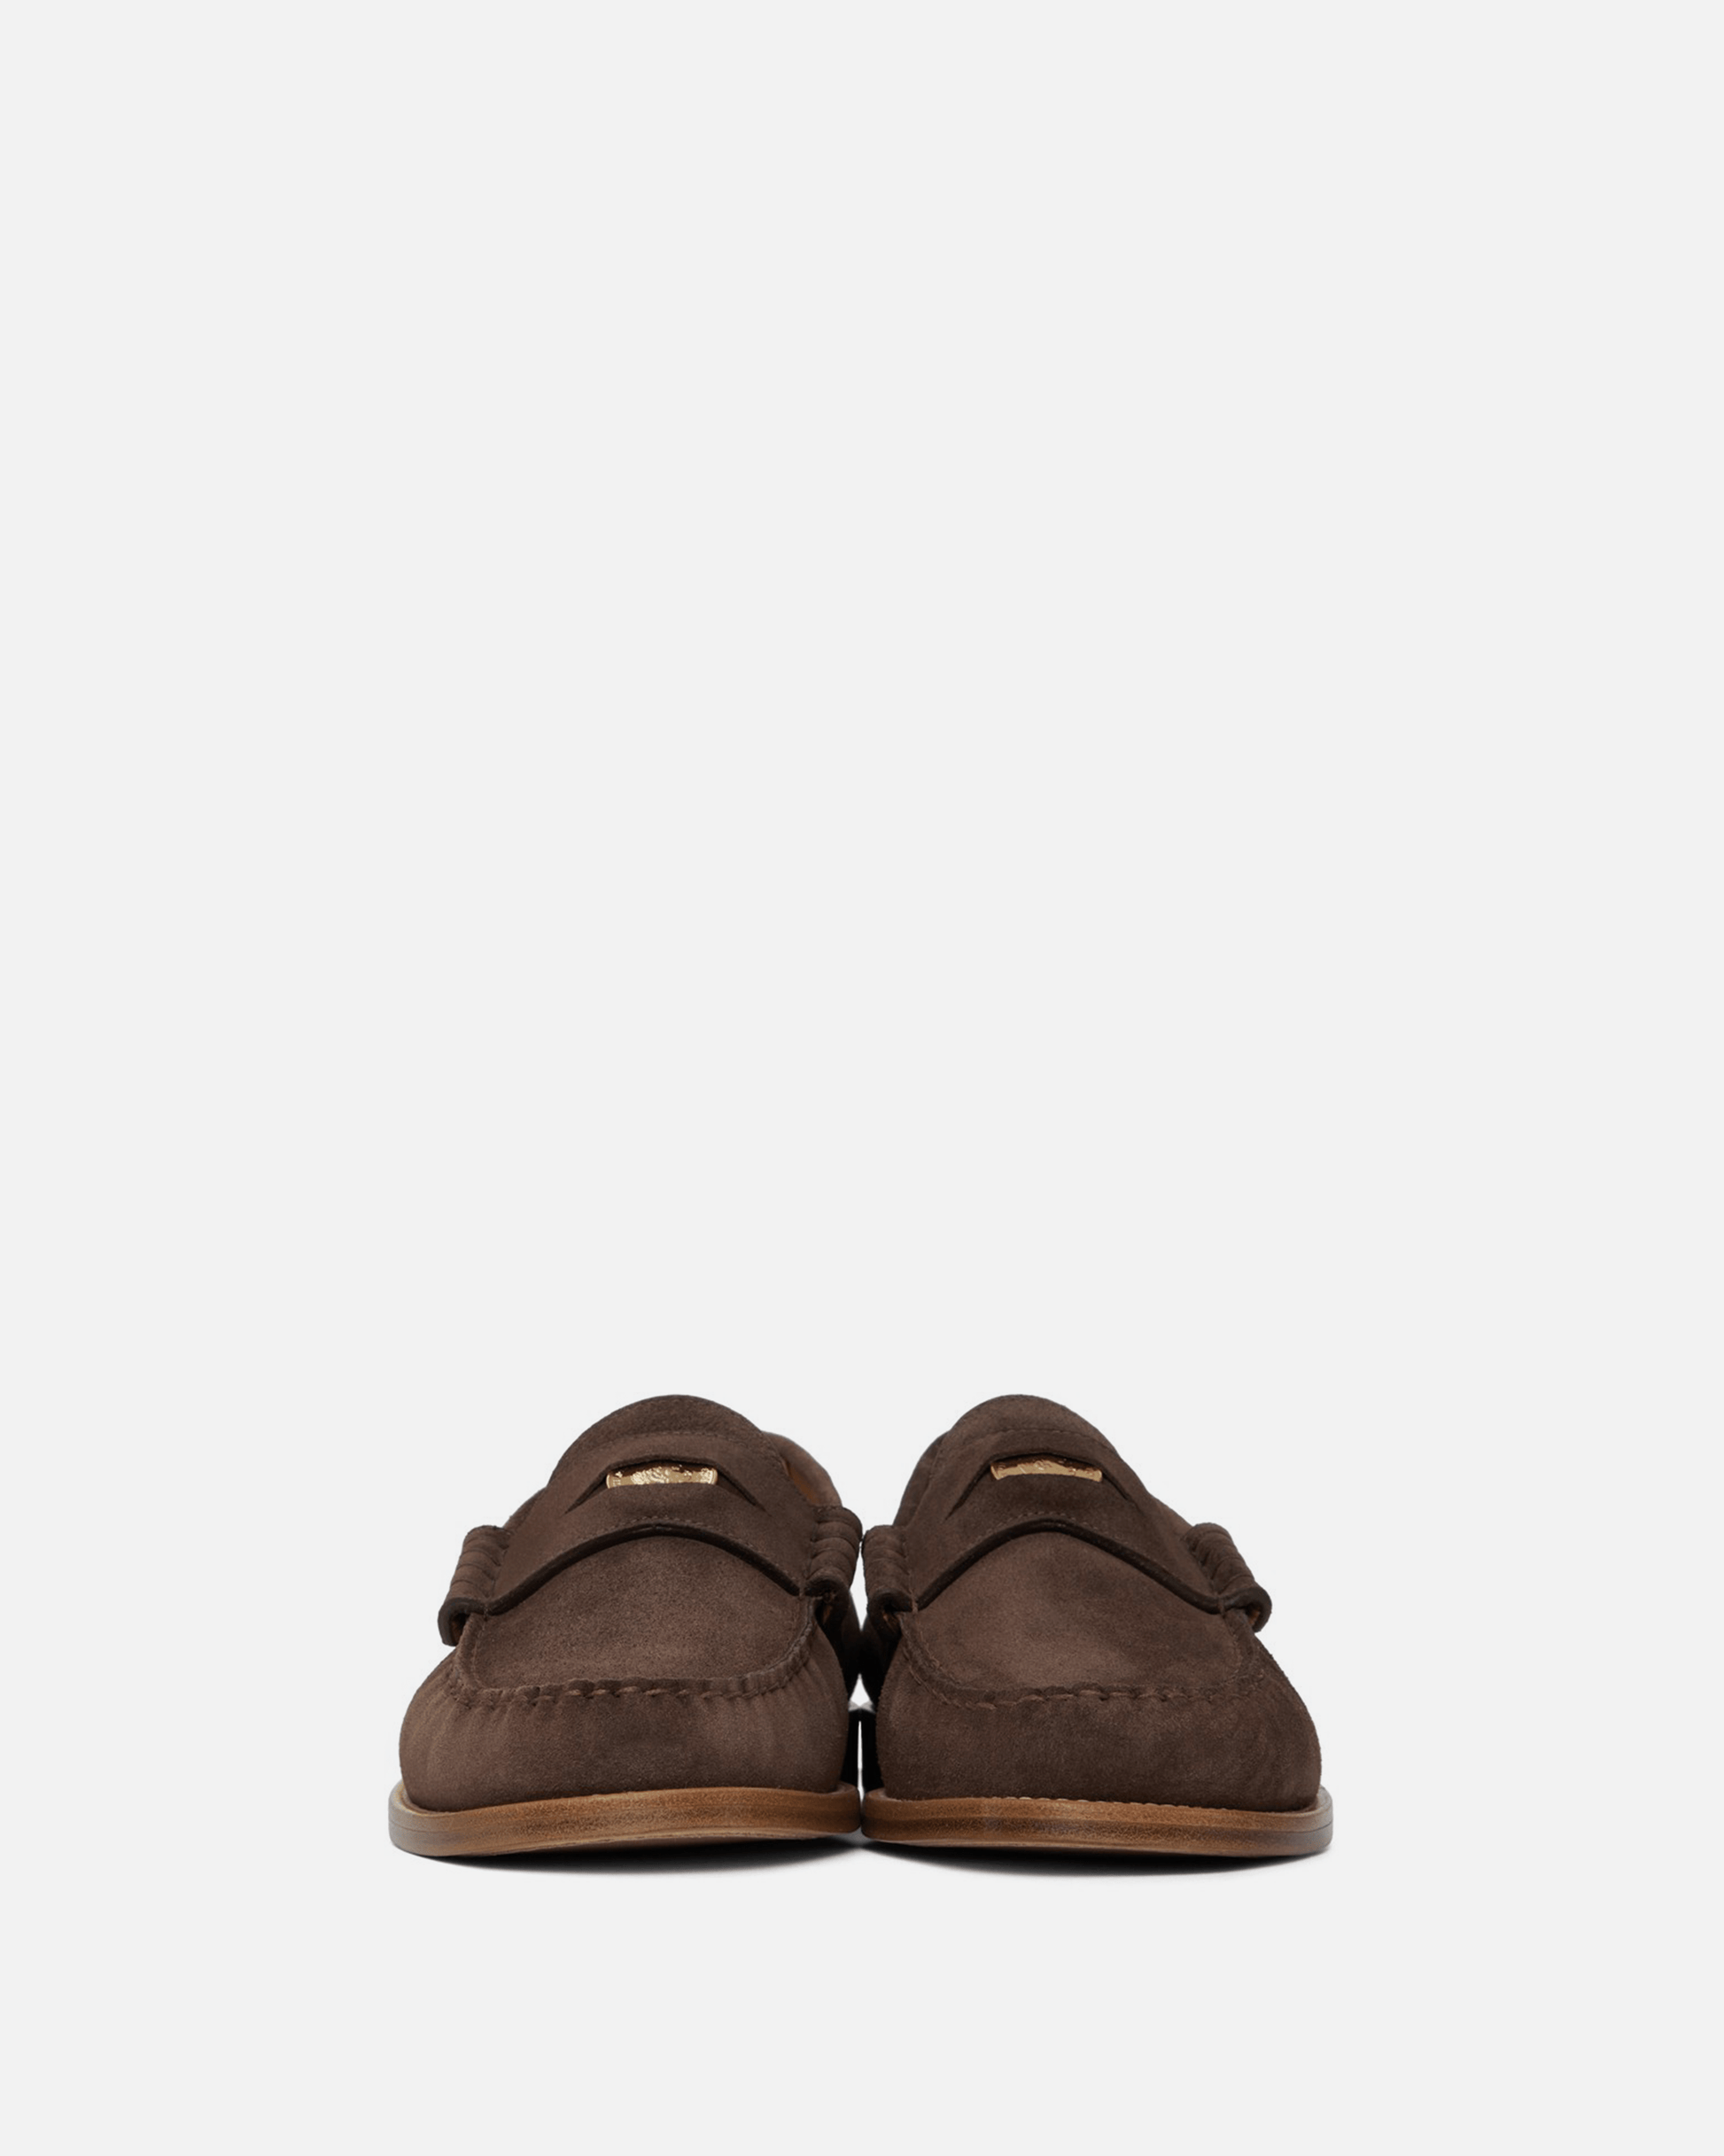 Rhude Men's Shoes Suede Penny Loafers in Brown